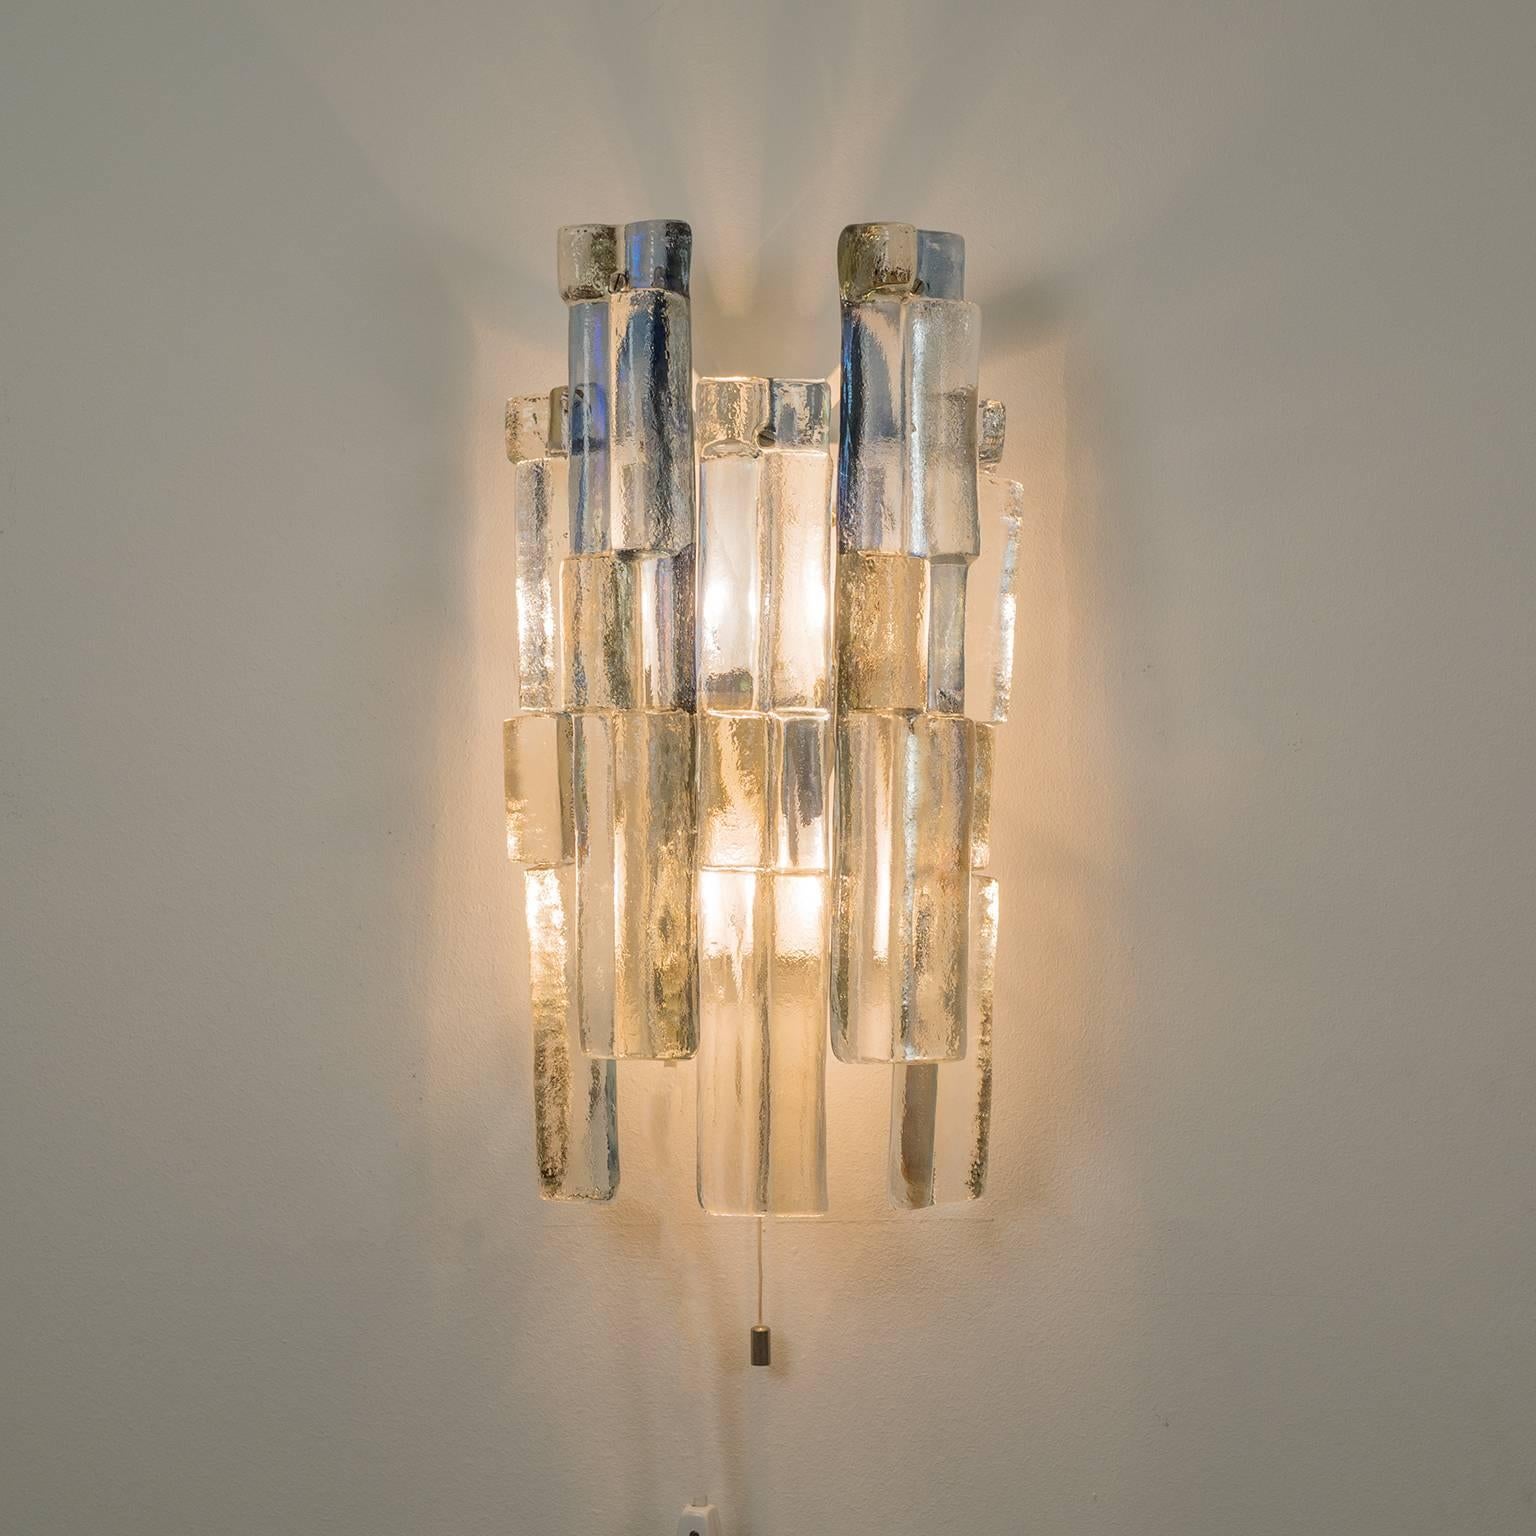 Rare large multicolored glass wall light by Kalmar, 1970s. Five long textured clear glass elements with blue and brown tinting are suspended on a Minimalist white lacquered metal backplate. Beautiful play of light and colors when lit by the two E14